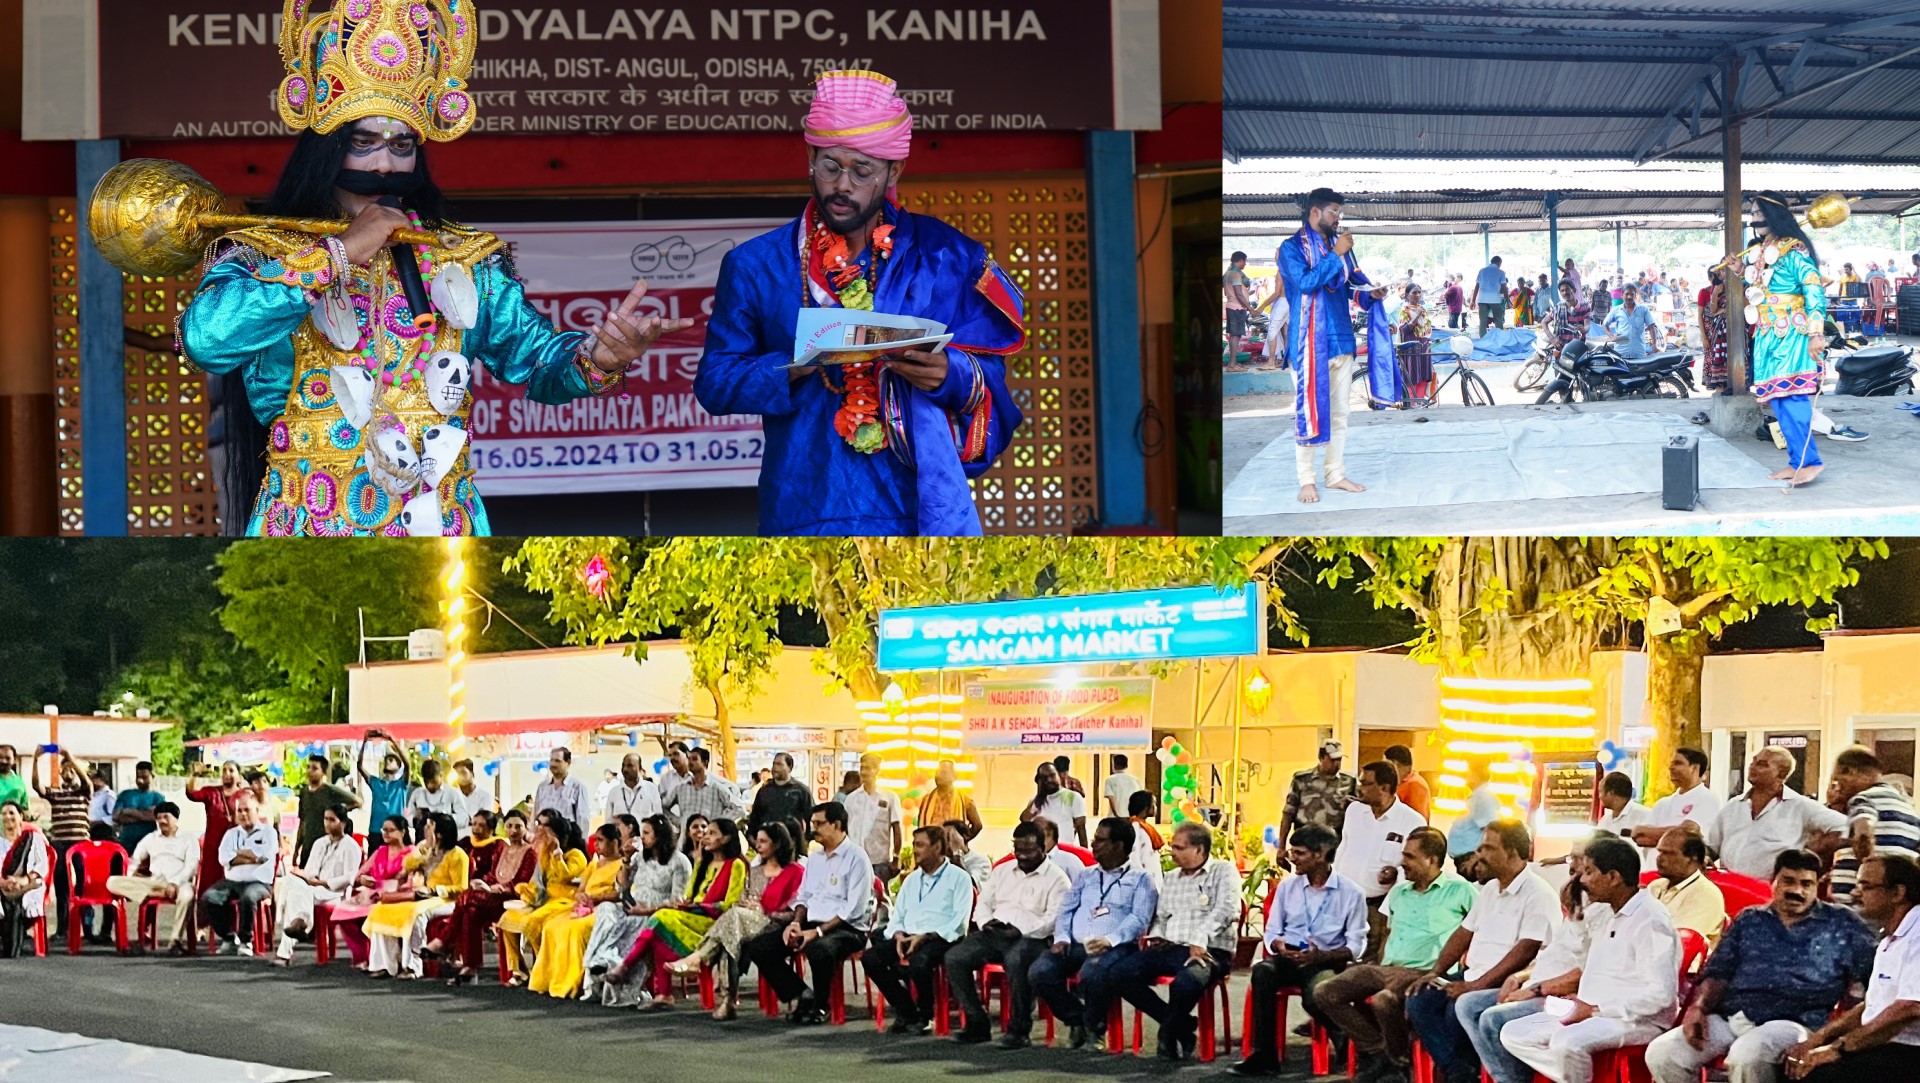 Swachhata Pakhwada was celebrated with great enthusiasm at NTPC Kaniha